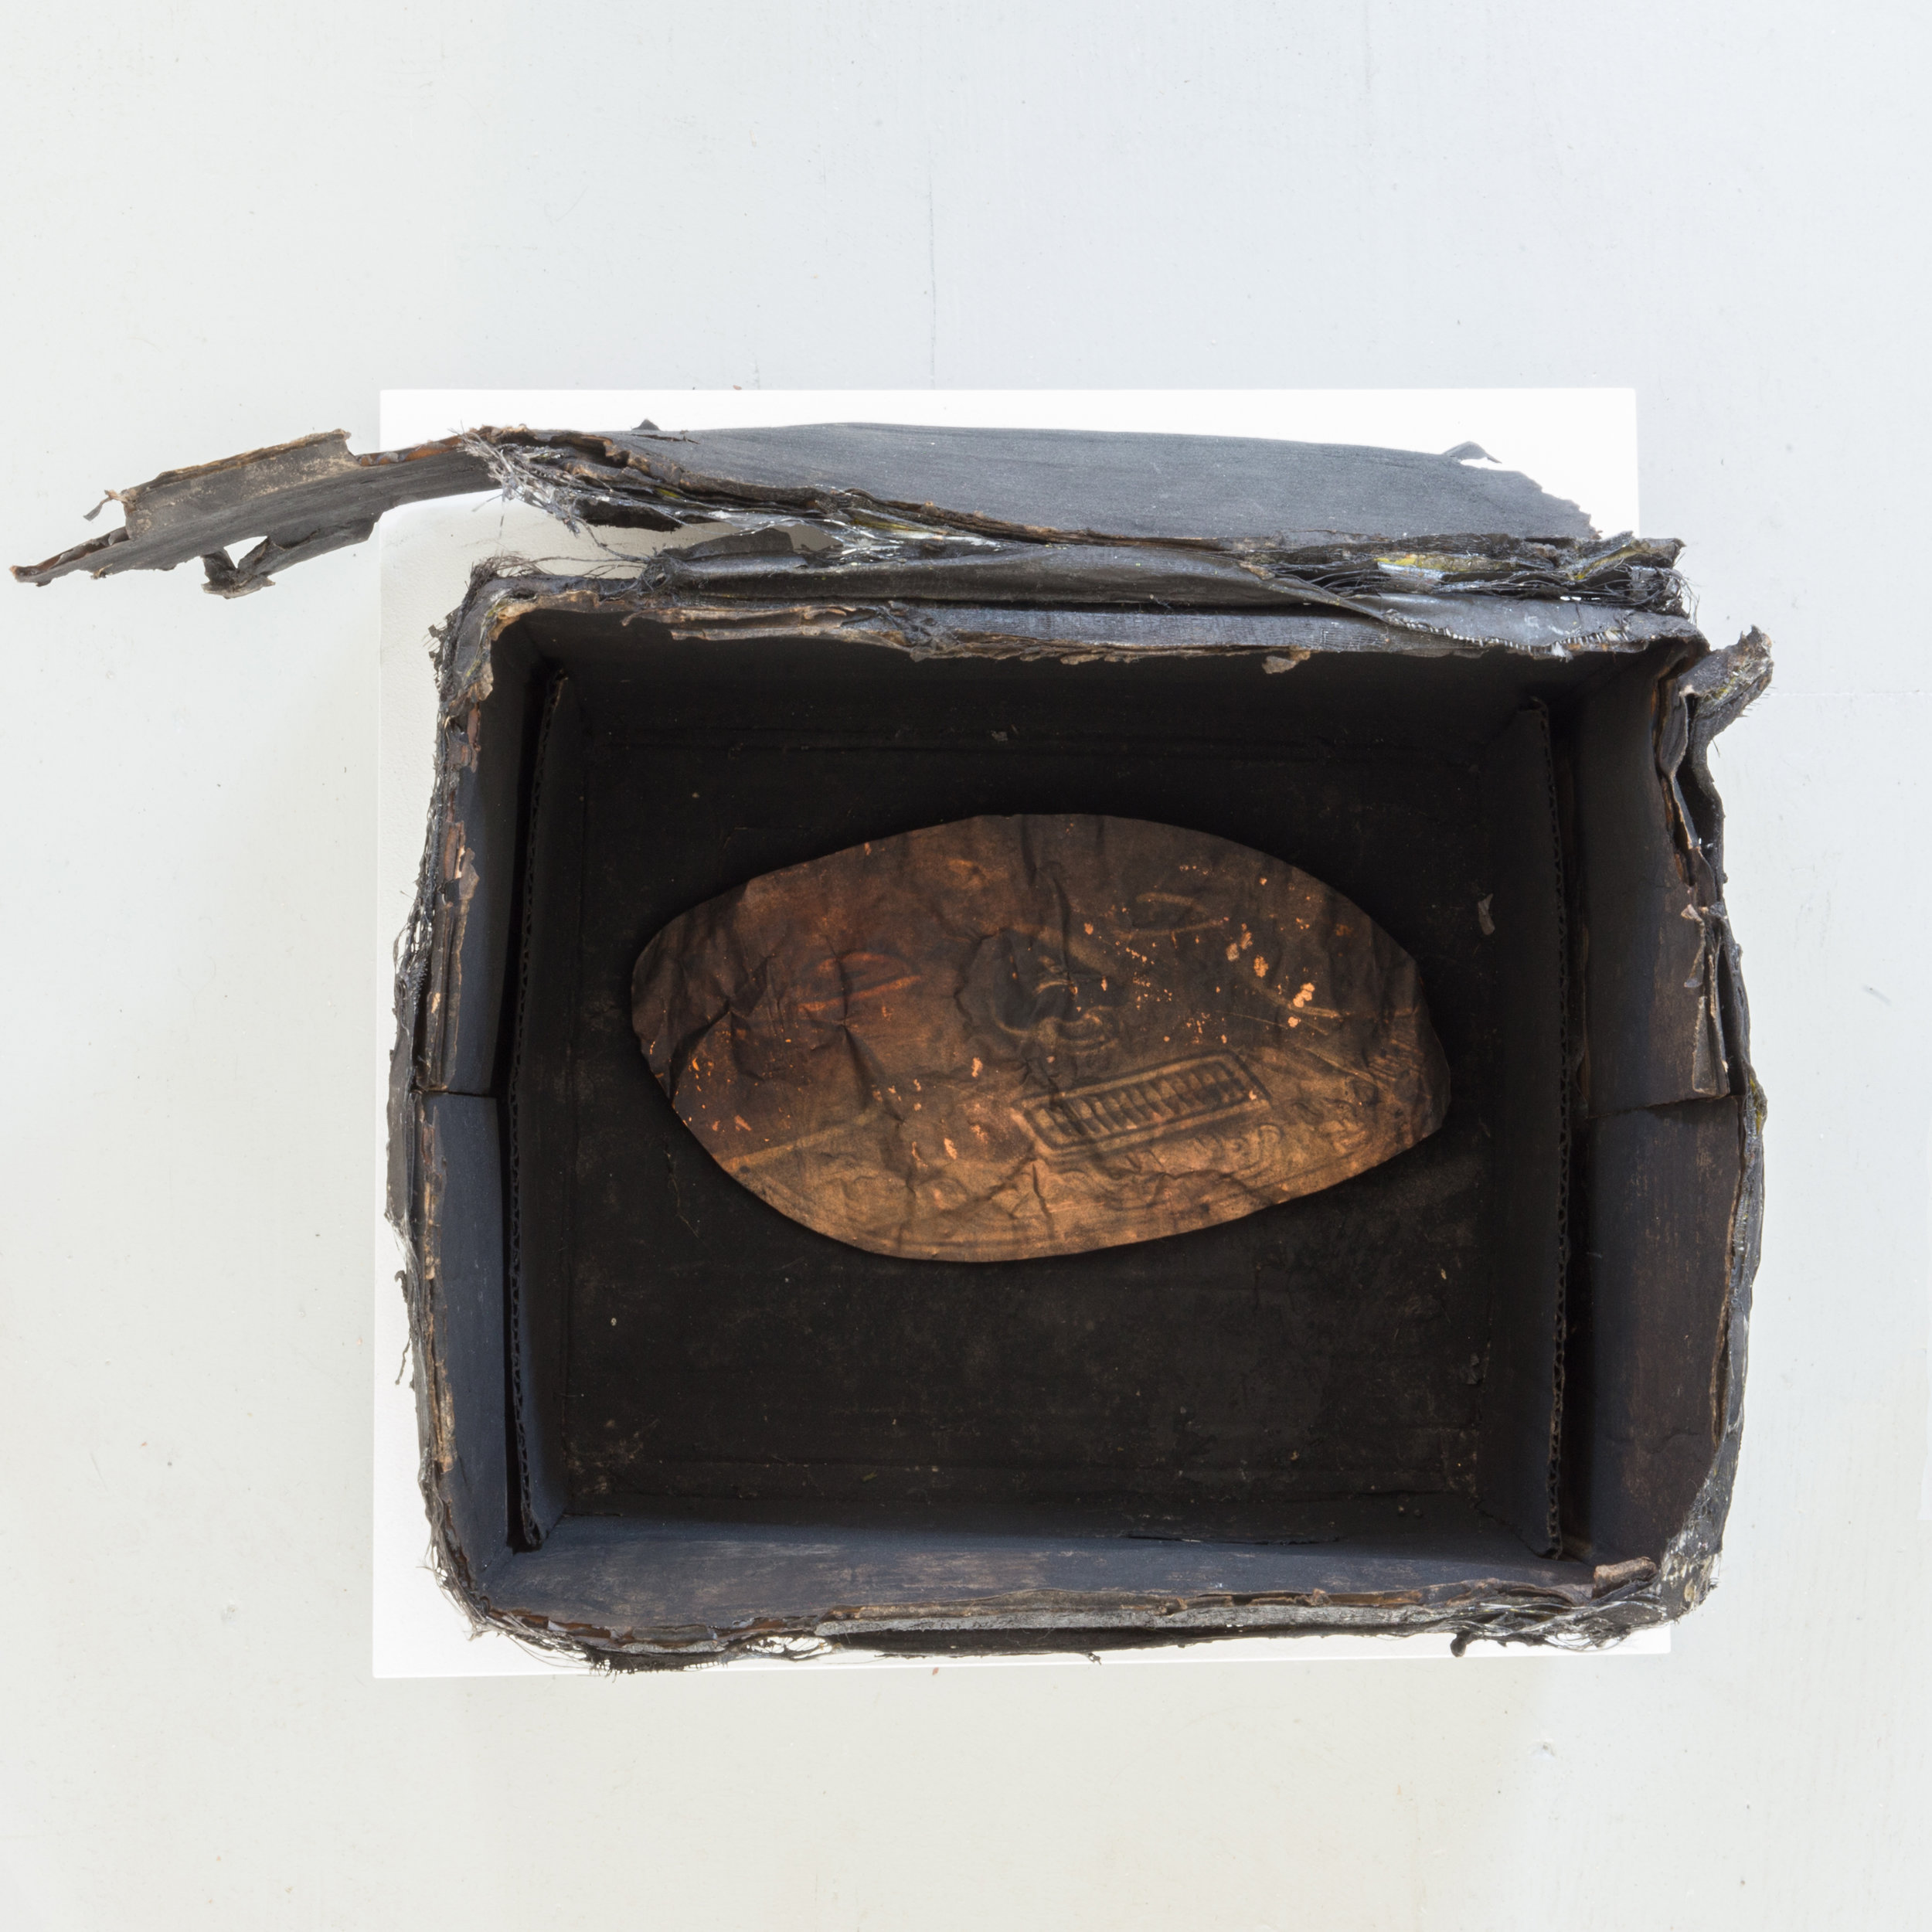  Harold Mendez. "Untitled (Death Mask)," 2015. Burned cardboard box, soot, toner, oxidized copper reproduction of pre-Columbian death mask from the Museo del Oro (Bogota, Colombia). 14" x 20" x 14"   